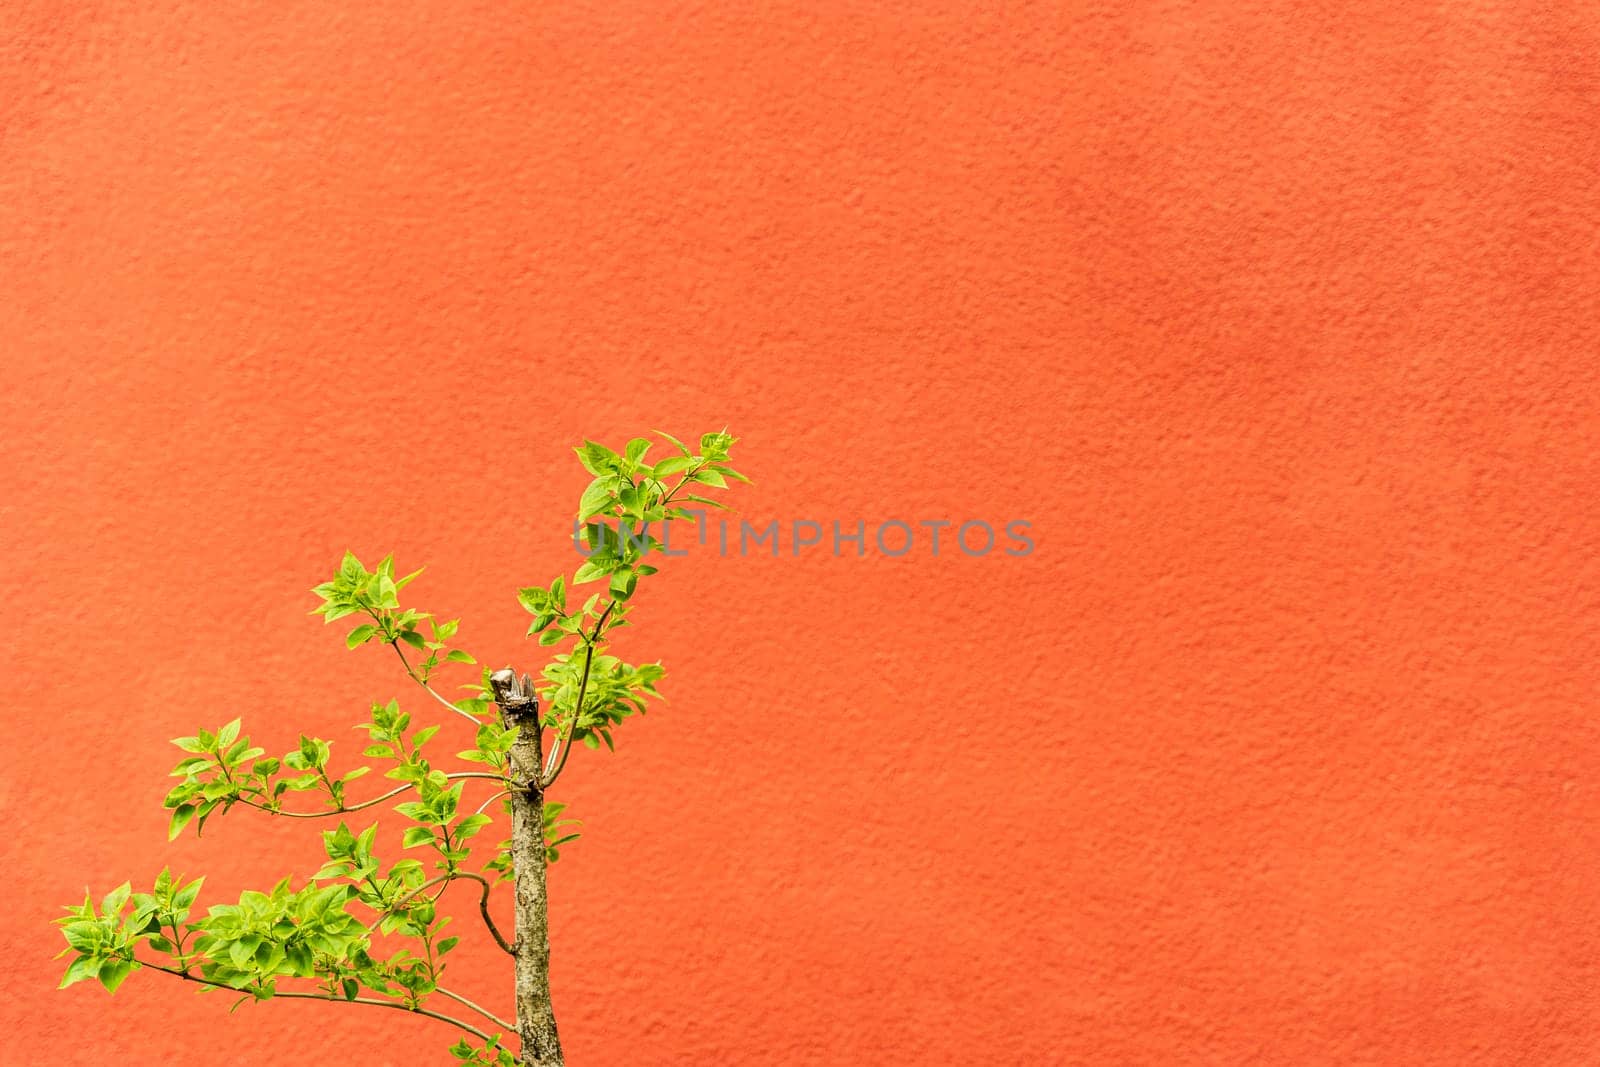 a green tree branch on a red-orange textured background.. greenery by audiznam2609